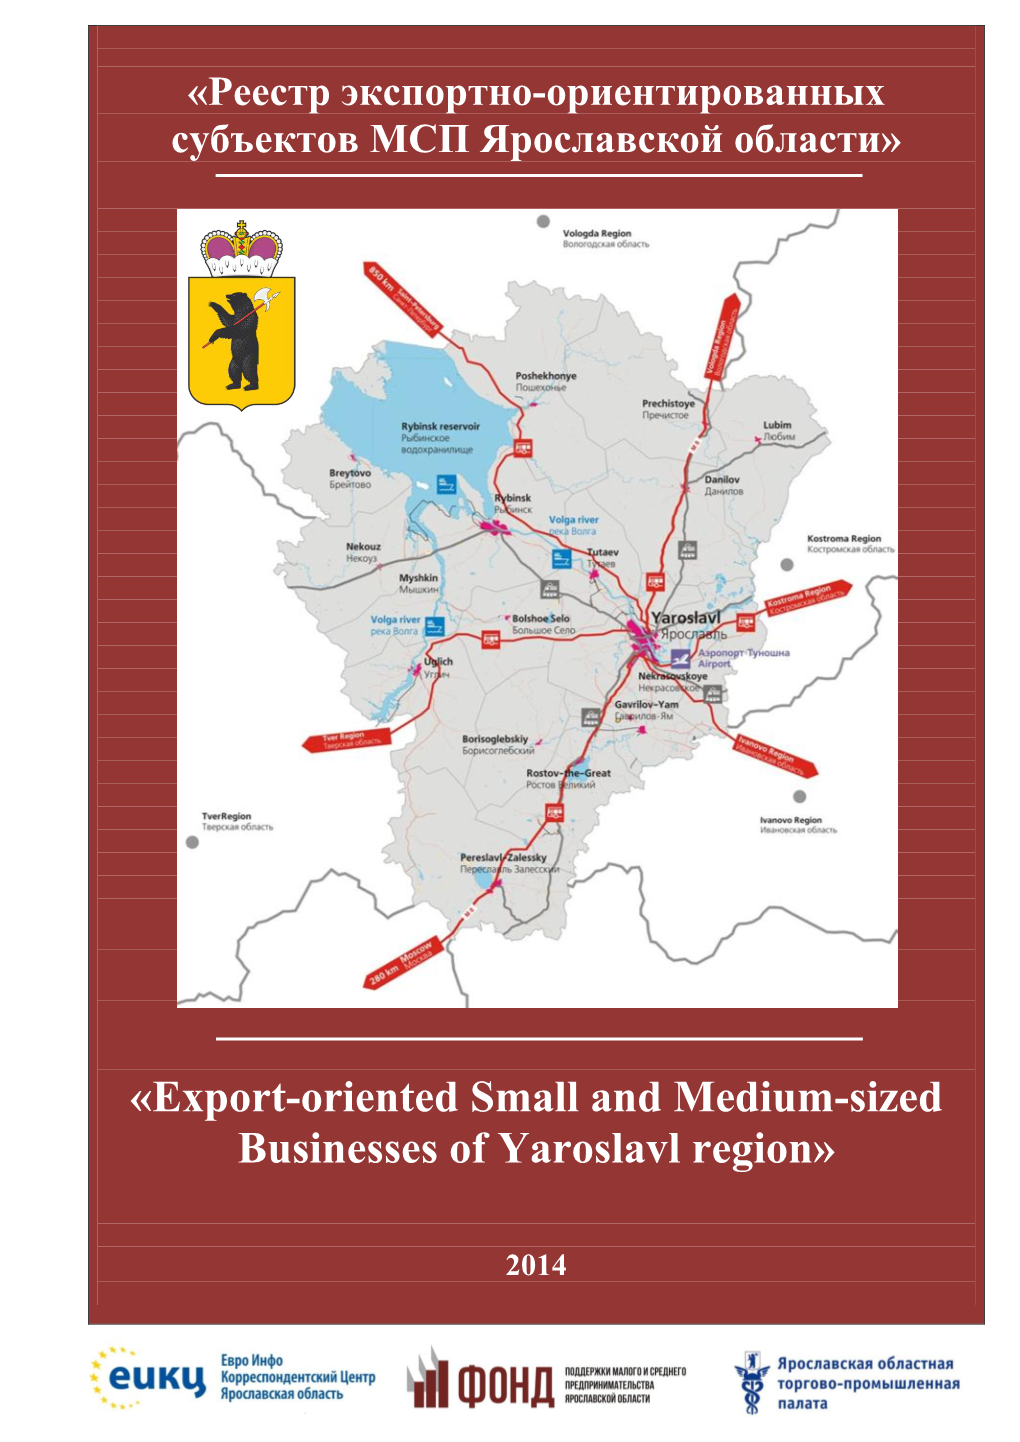 «Export-Oriented Small and Medium-Sized Businesses of Yaroslavl Region»